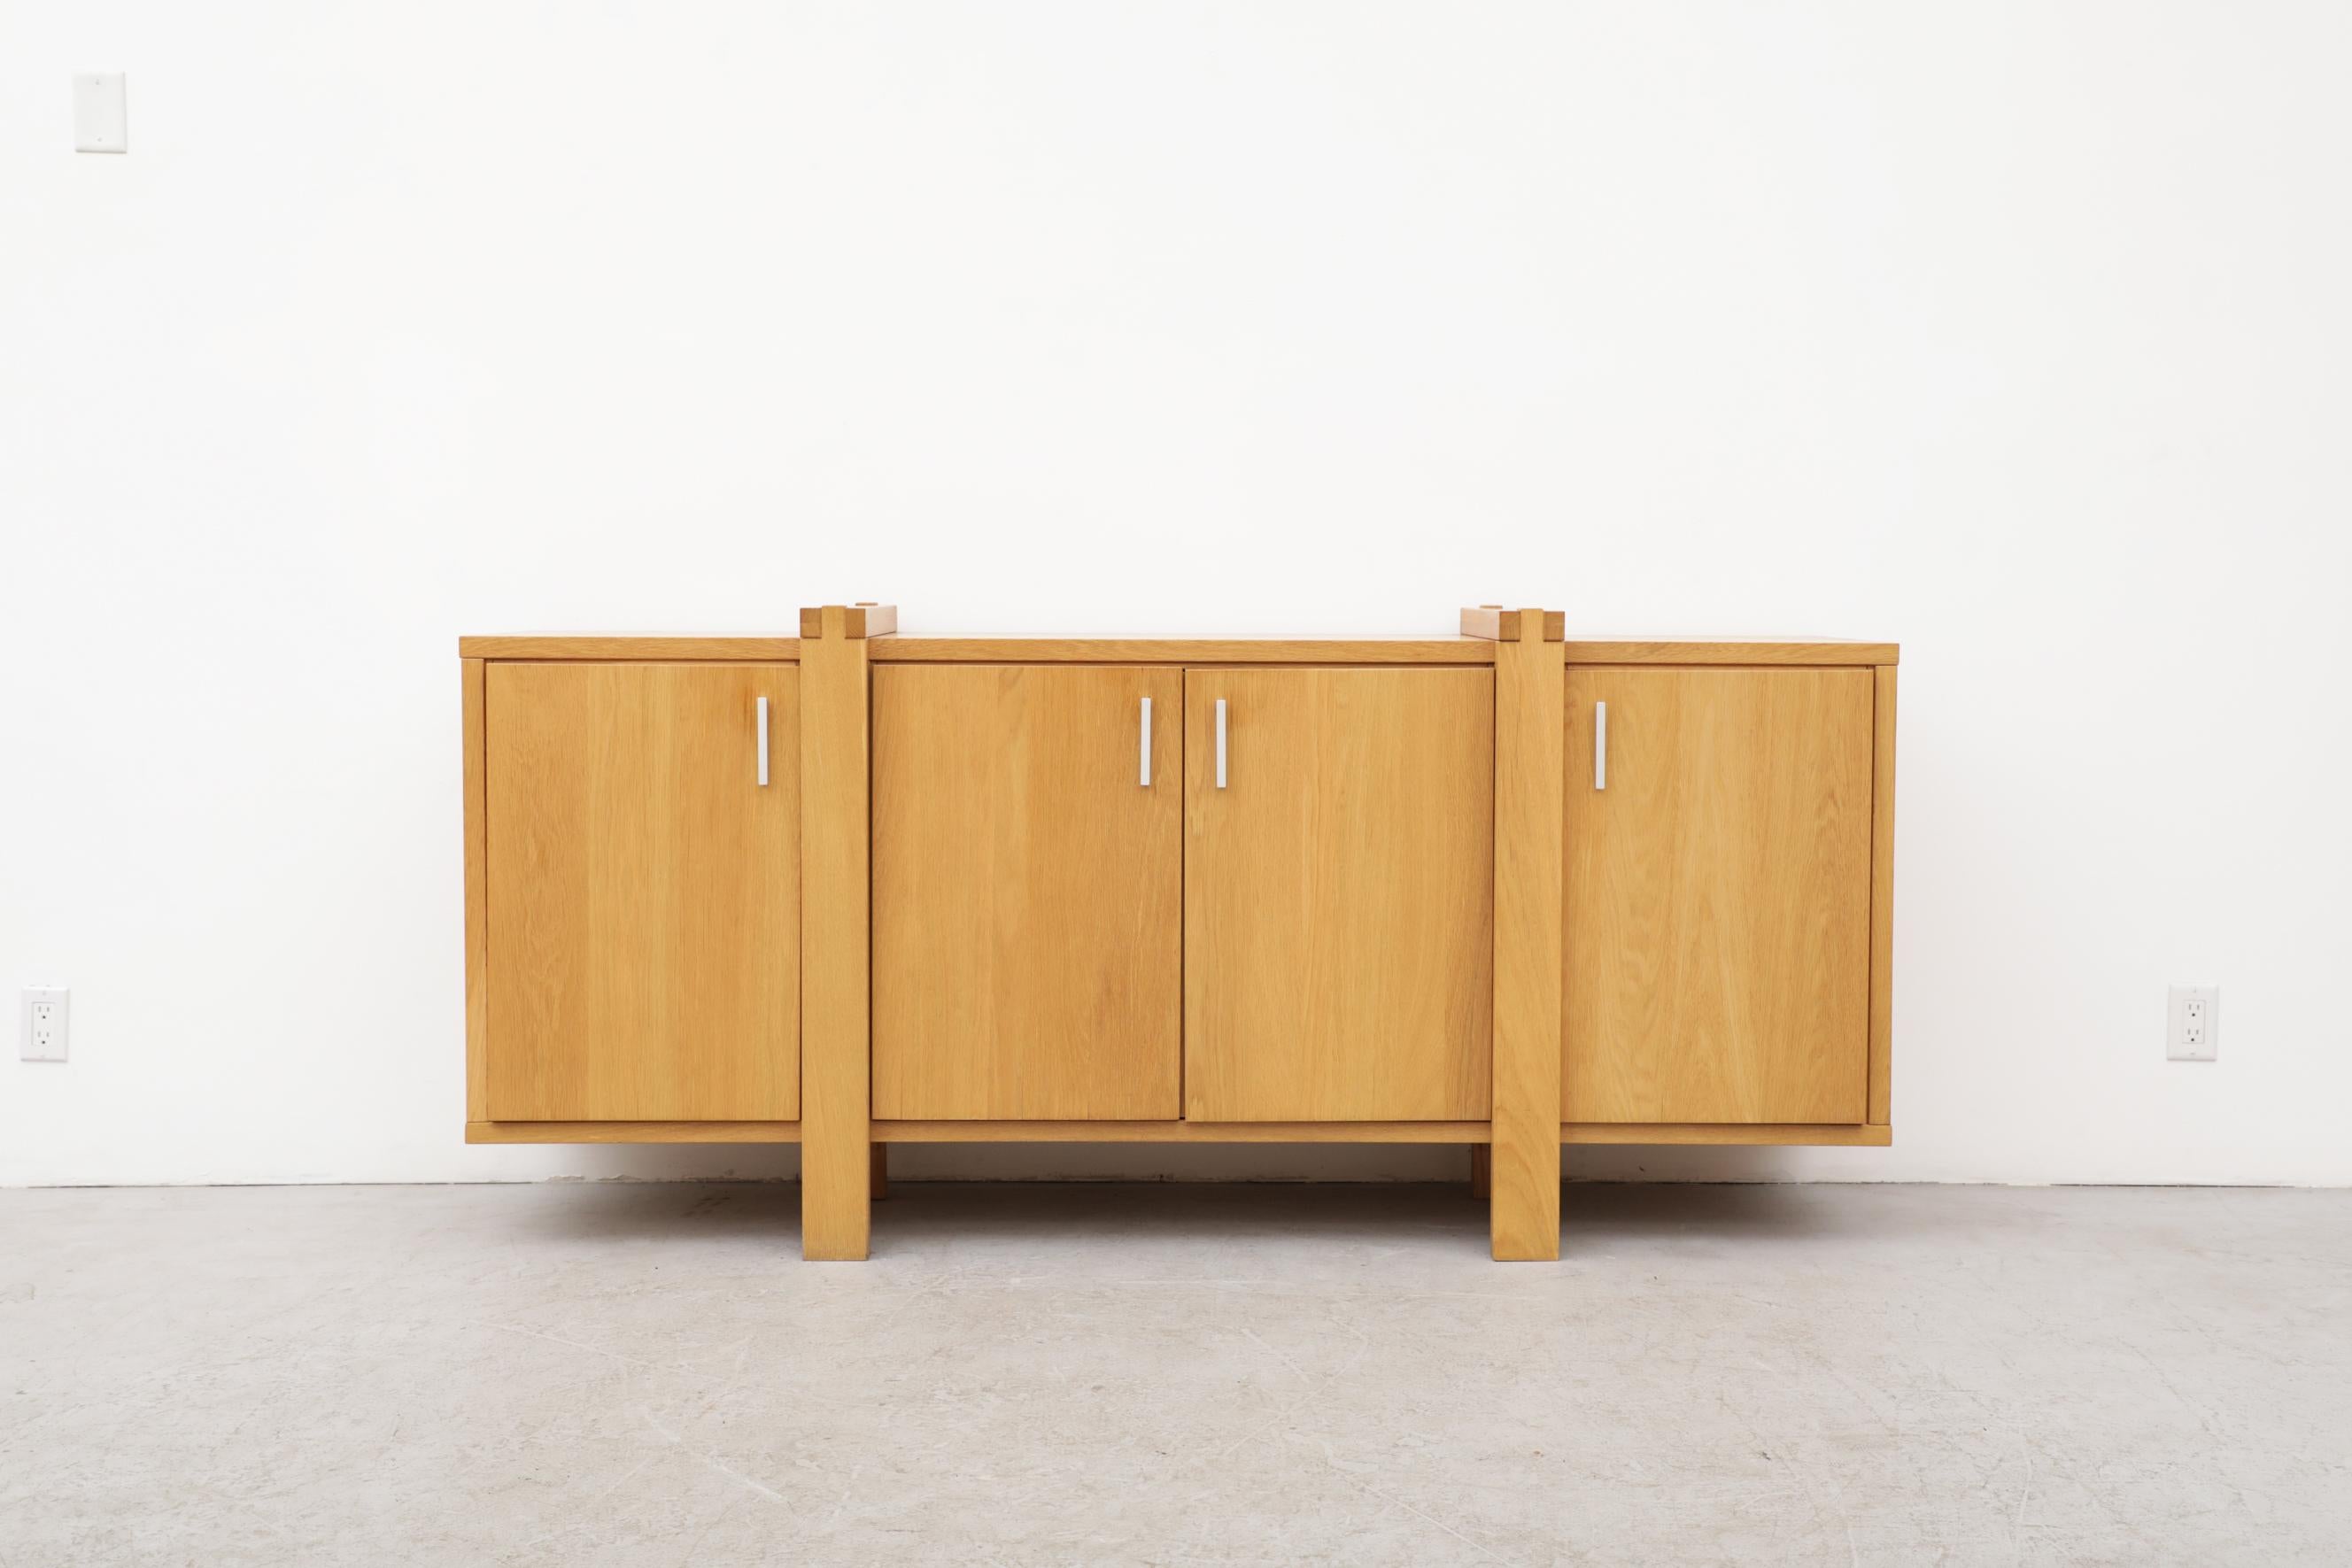 Pierre Chapo inspired oak sideboard with aluminum pulls, 4 storage cabinets and box joint detail. Handsome construction with legs that wrap around the piece. In original condition with visible wear including some wear marks and chipping. Wear is